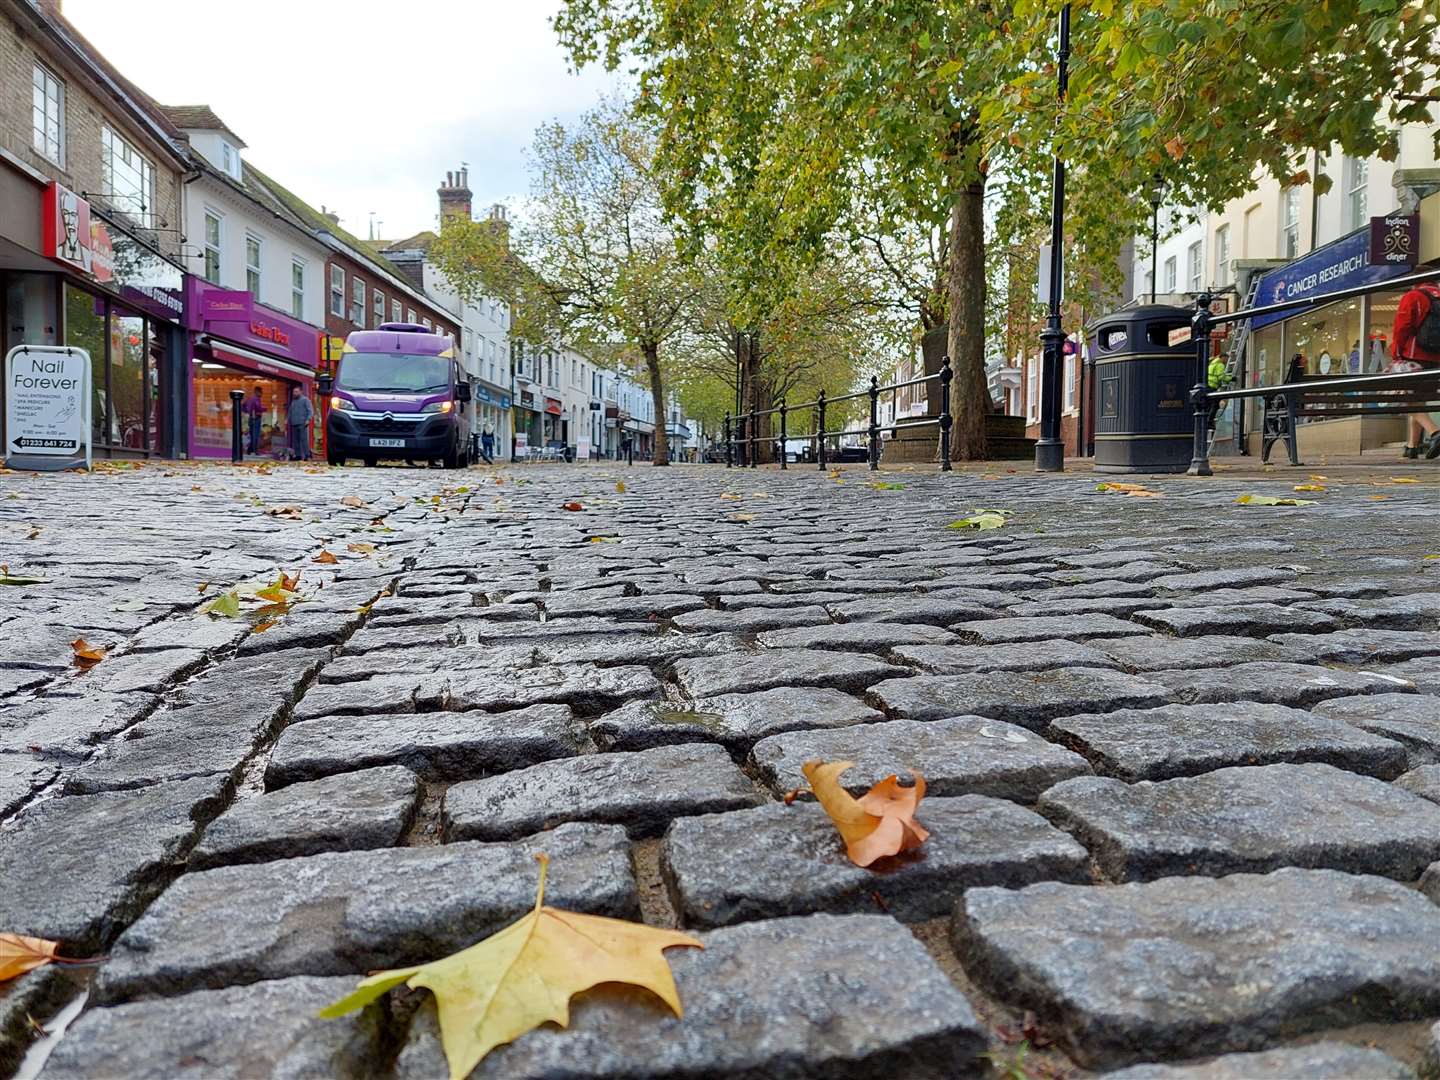 The cobbles in the Lower High Street are set to be removed next year